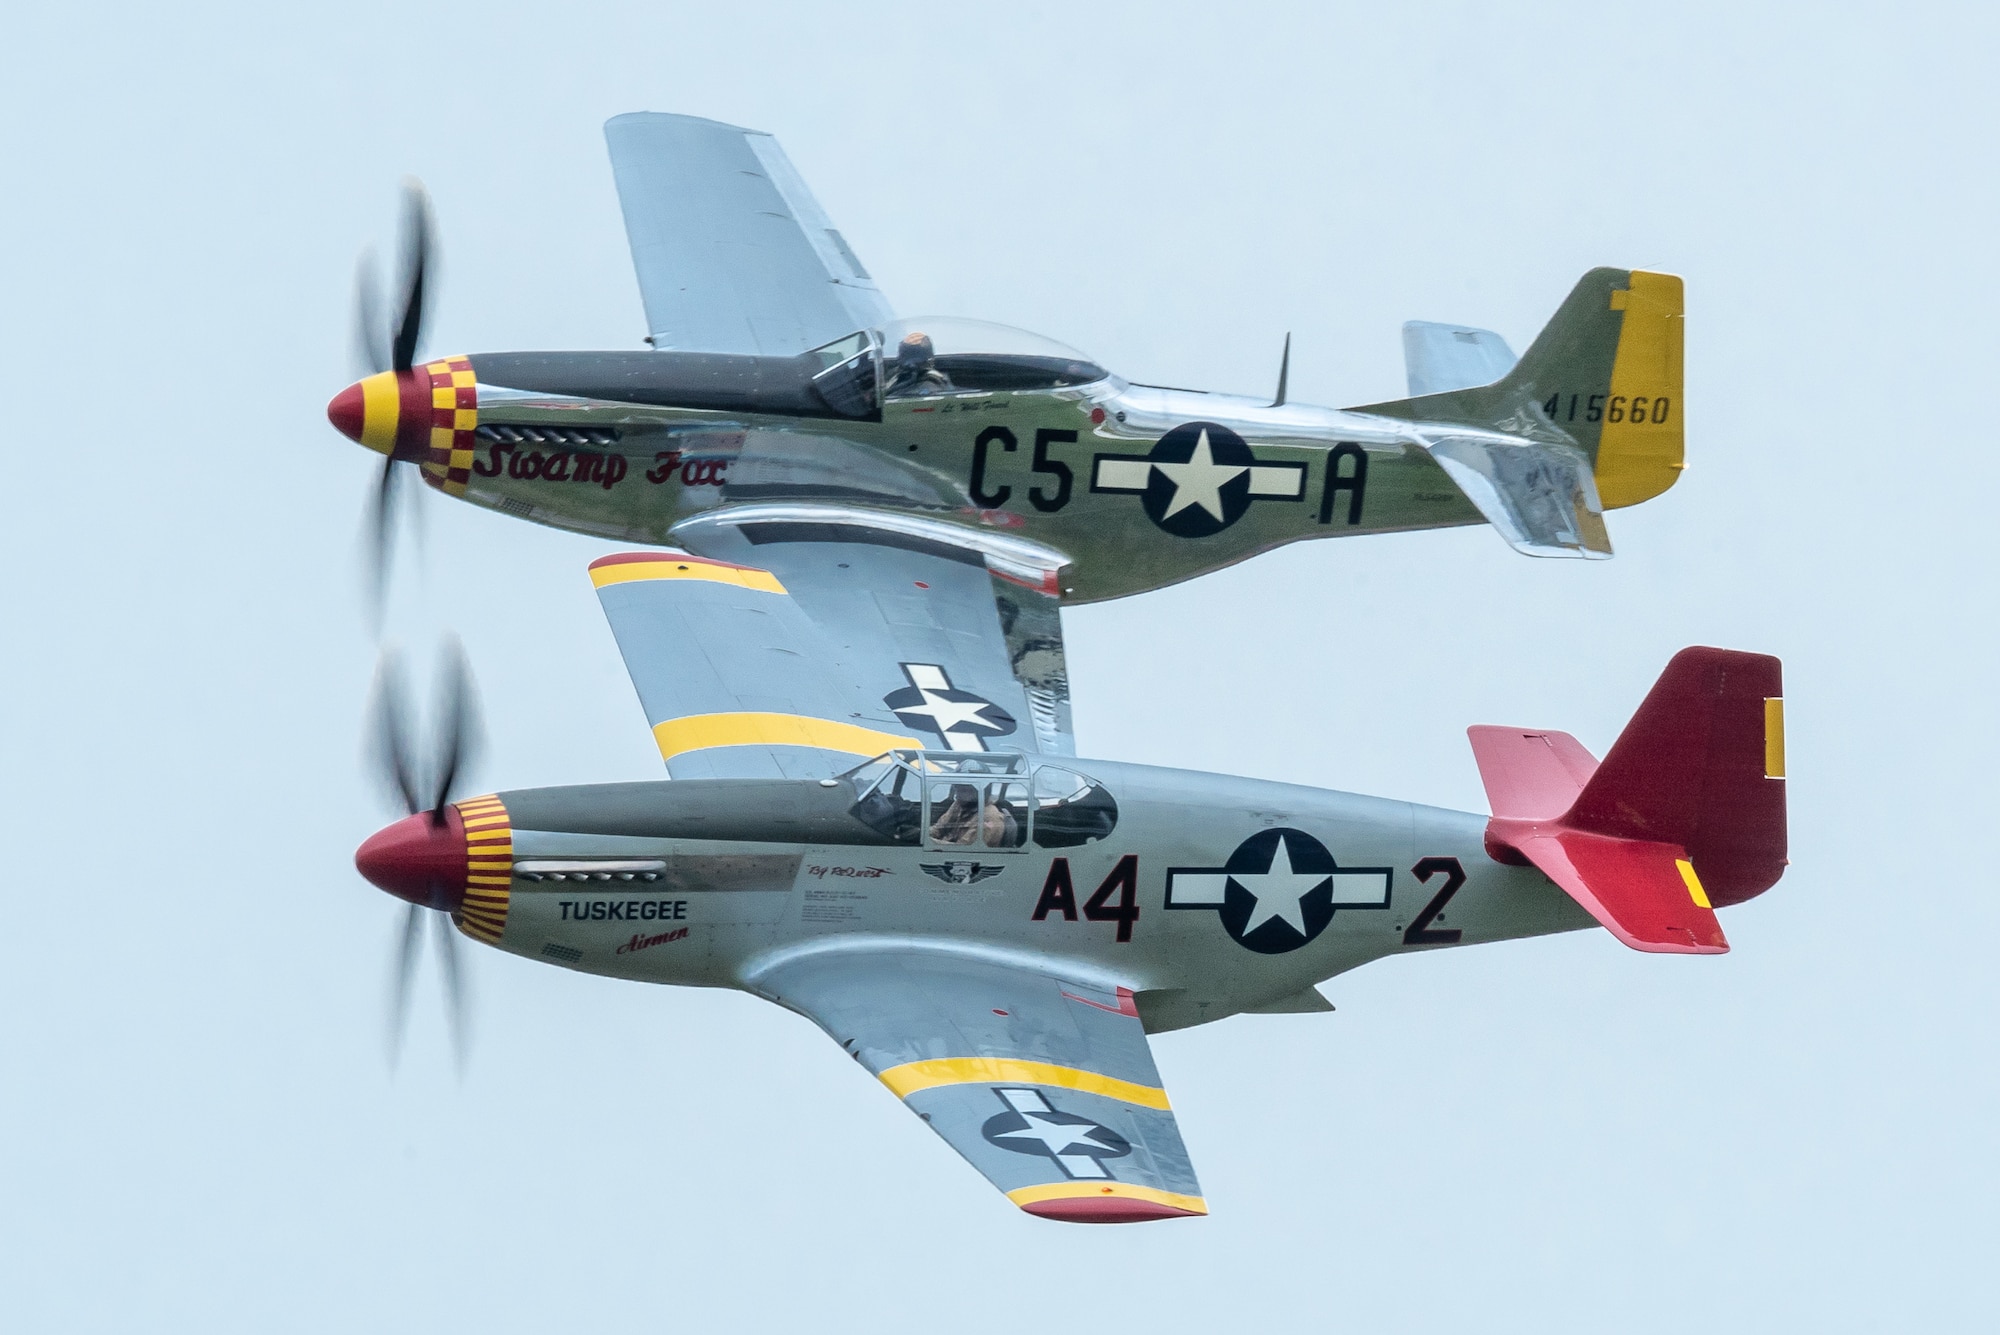 A two-ship P-51 Mustang formation performs an aerial demonstration over Bowman Field in Louisville, Ky., April 17, 2021, as part of the Thunder Over Louisville air show. The top aircraft, nicknamed Swamp Fox, is now privately owned but once belonged to the active inventory of the Kentucky Air National Guard following World War II. (U.S. Air National Guard photo by Dale Greer)